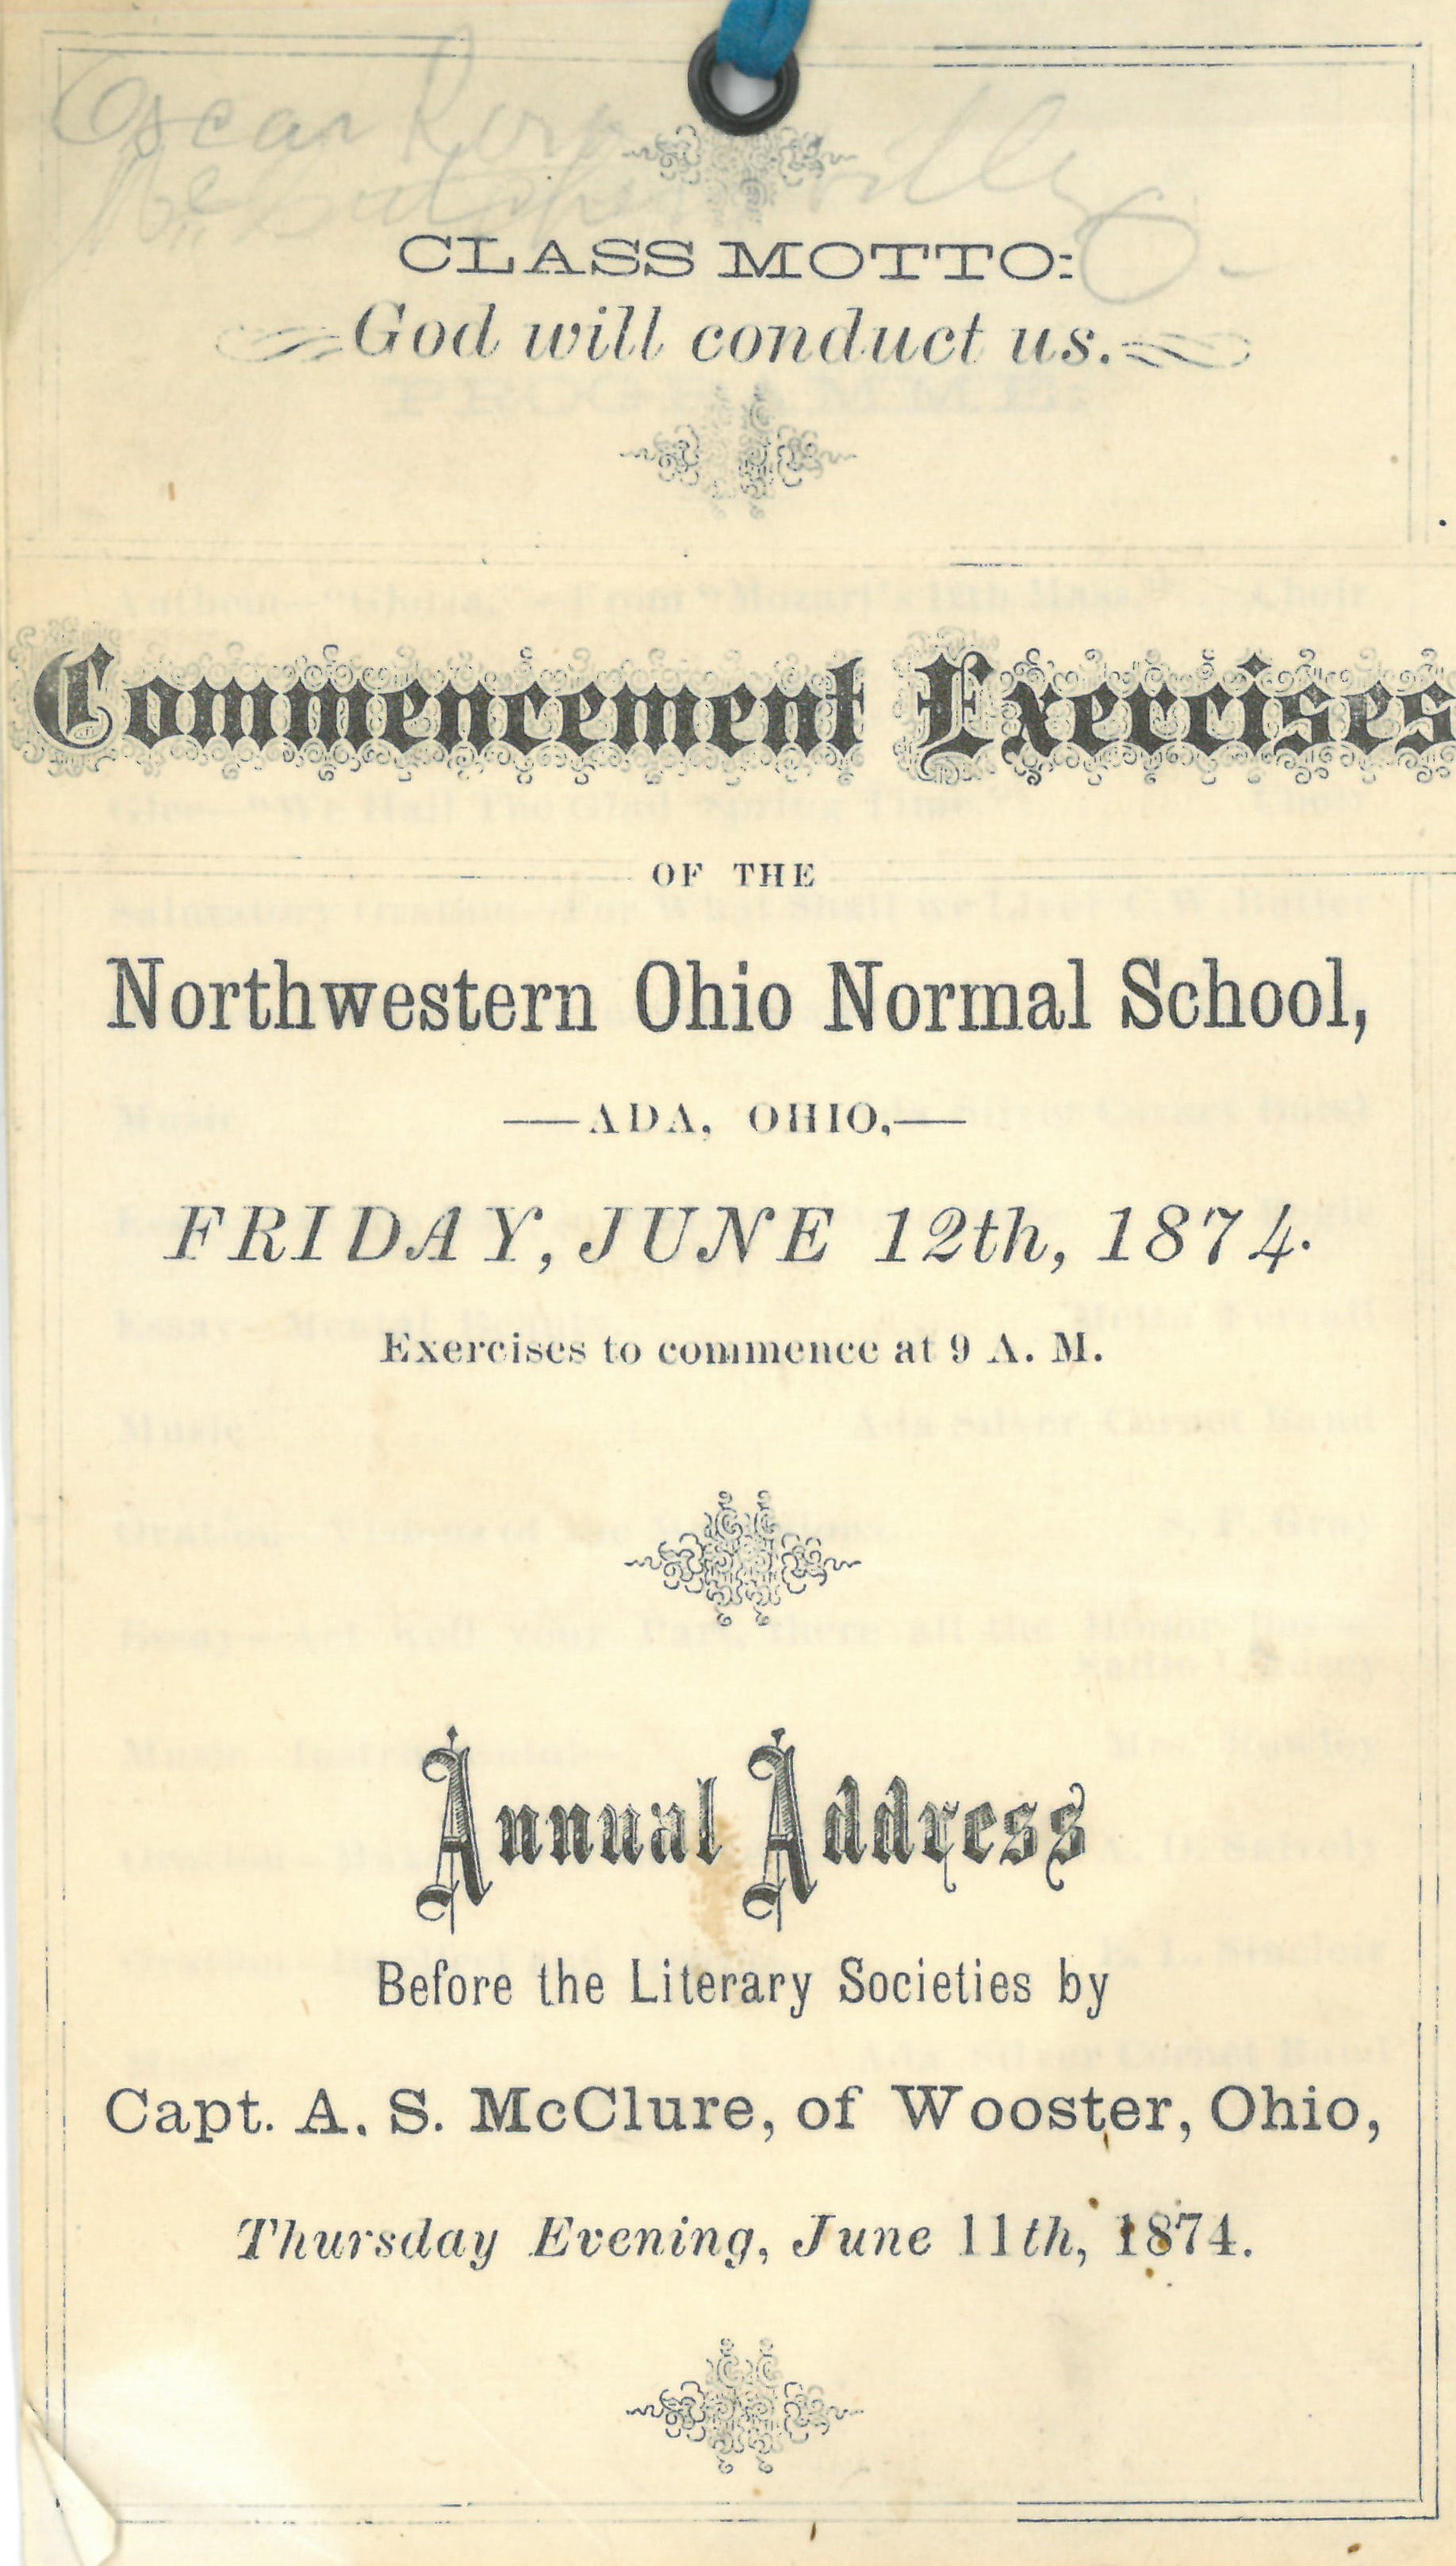 Program cover for ONU’s first commencement in 1874.